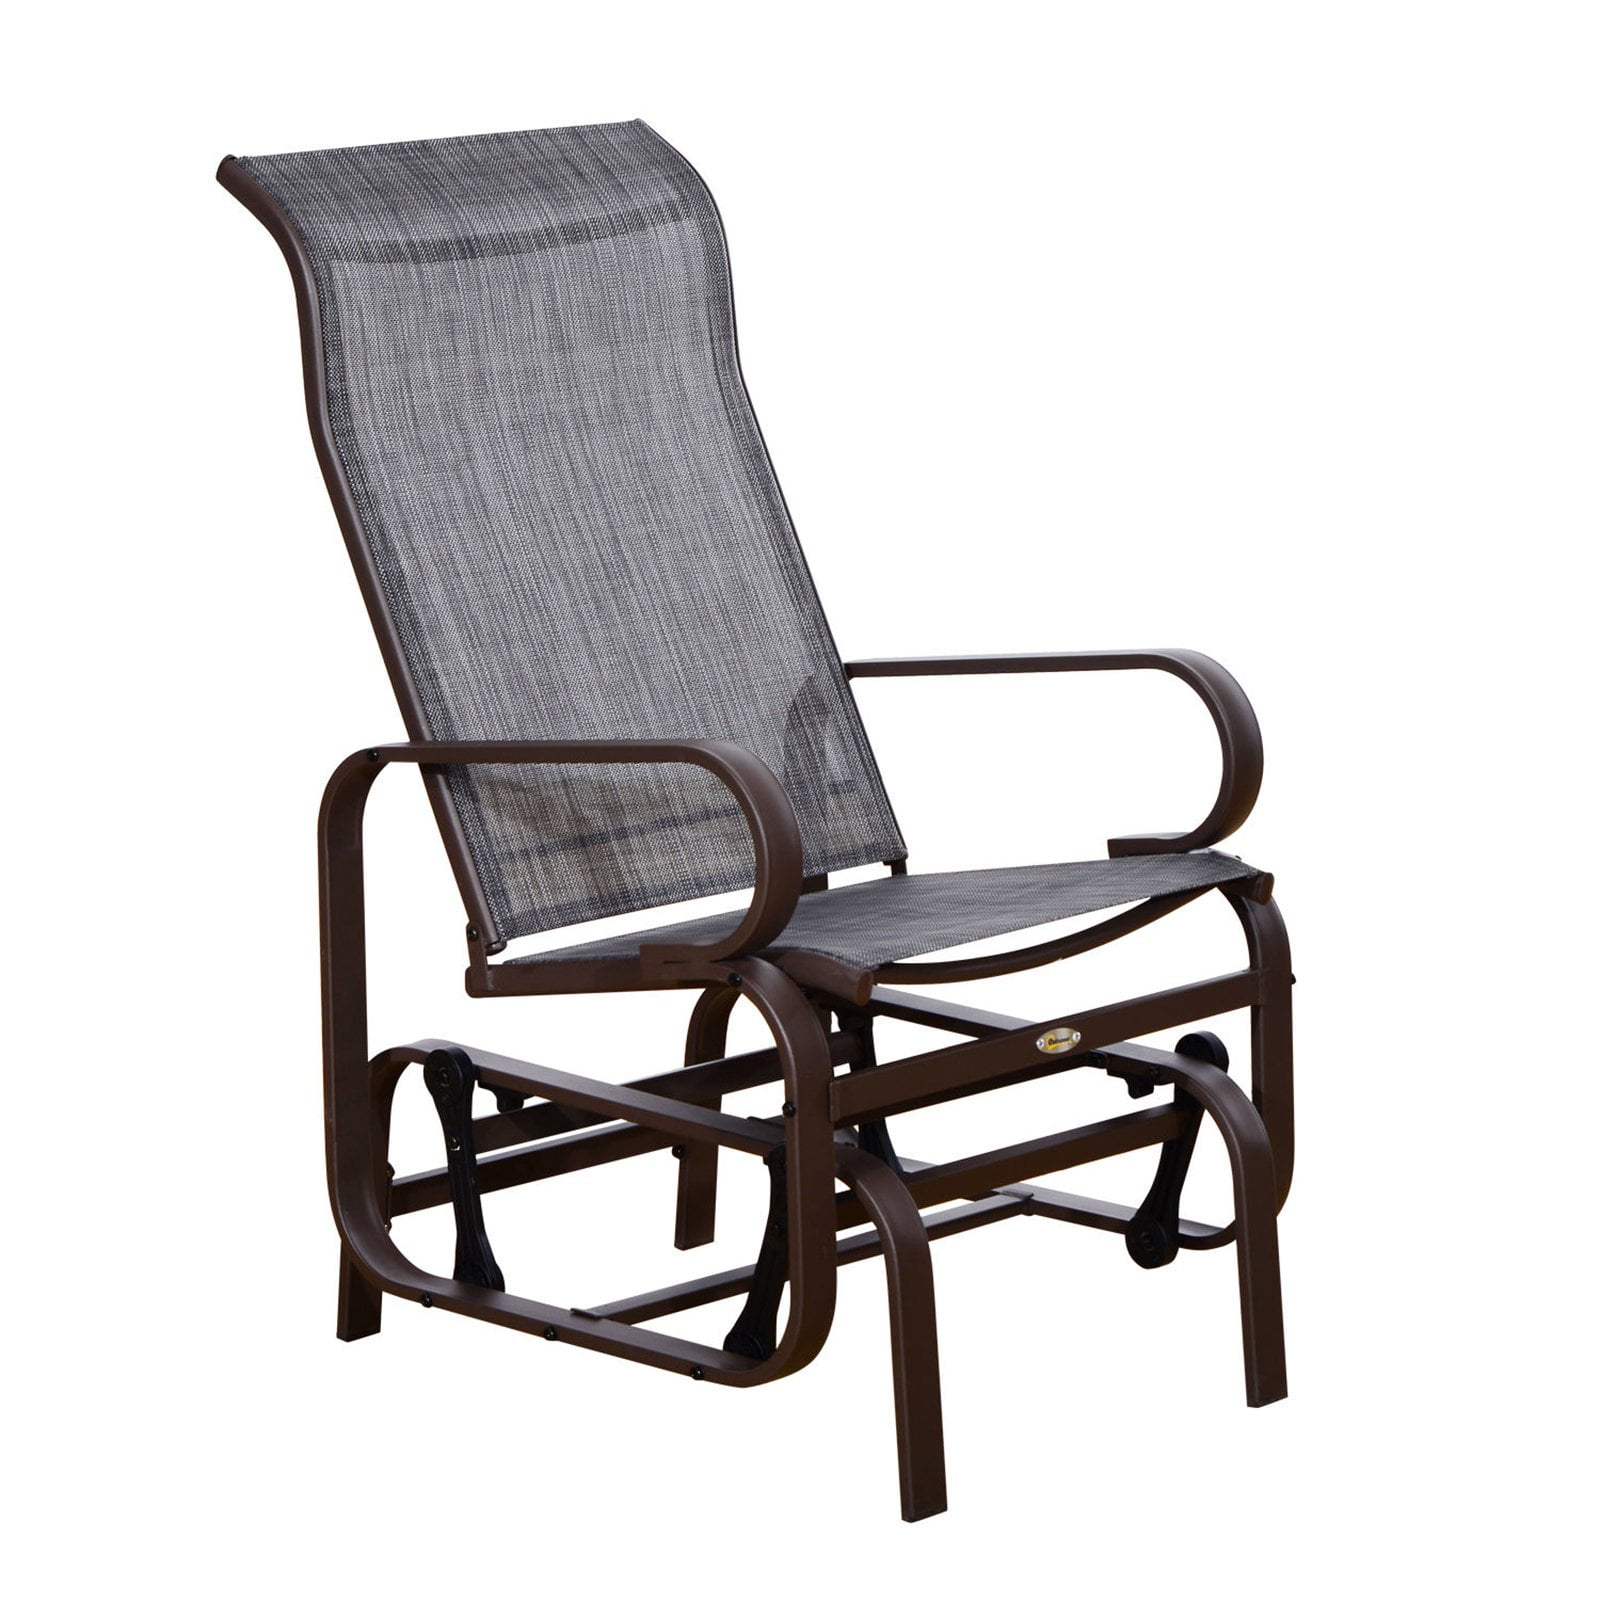 Outsunny Mesh Fabric Patio Glider Chair